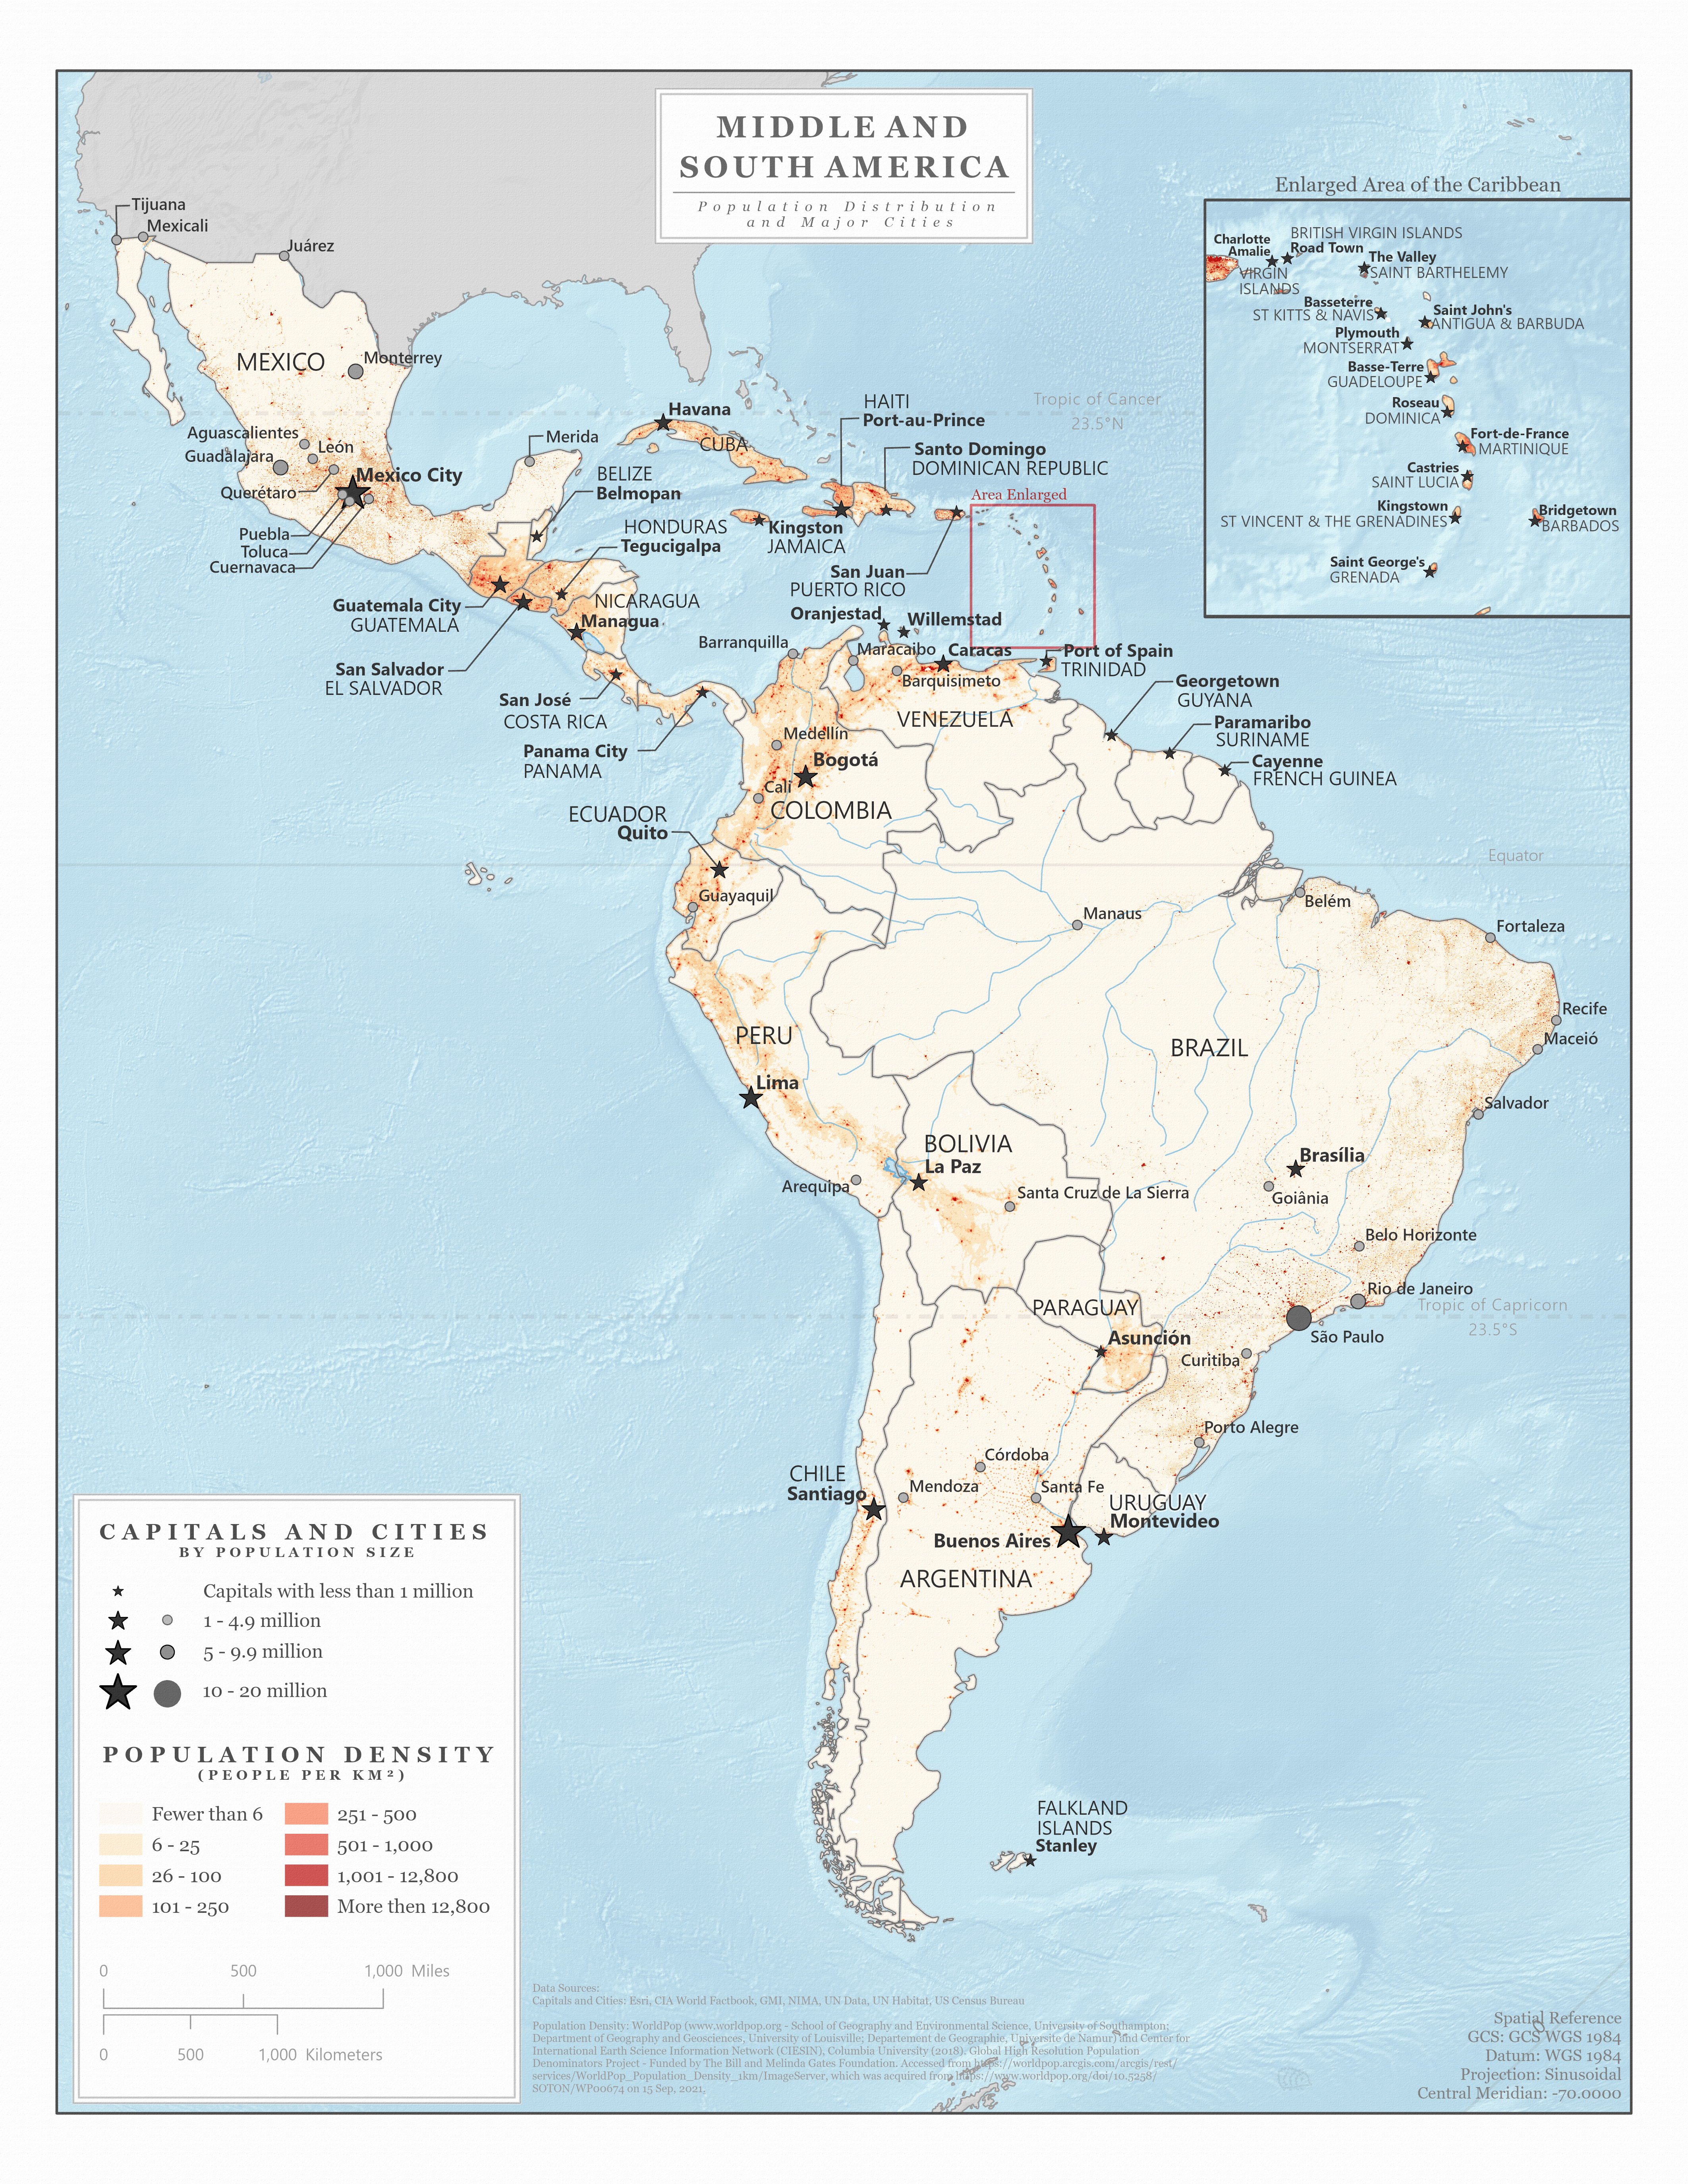 Countries, capitals, and population sizes map of Middle and South America